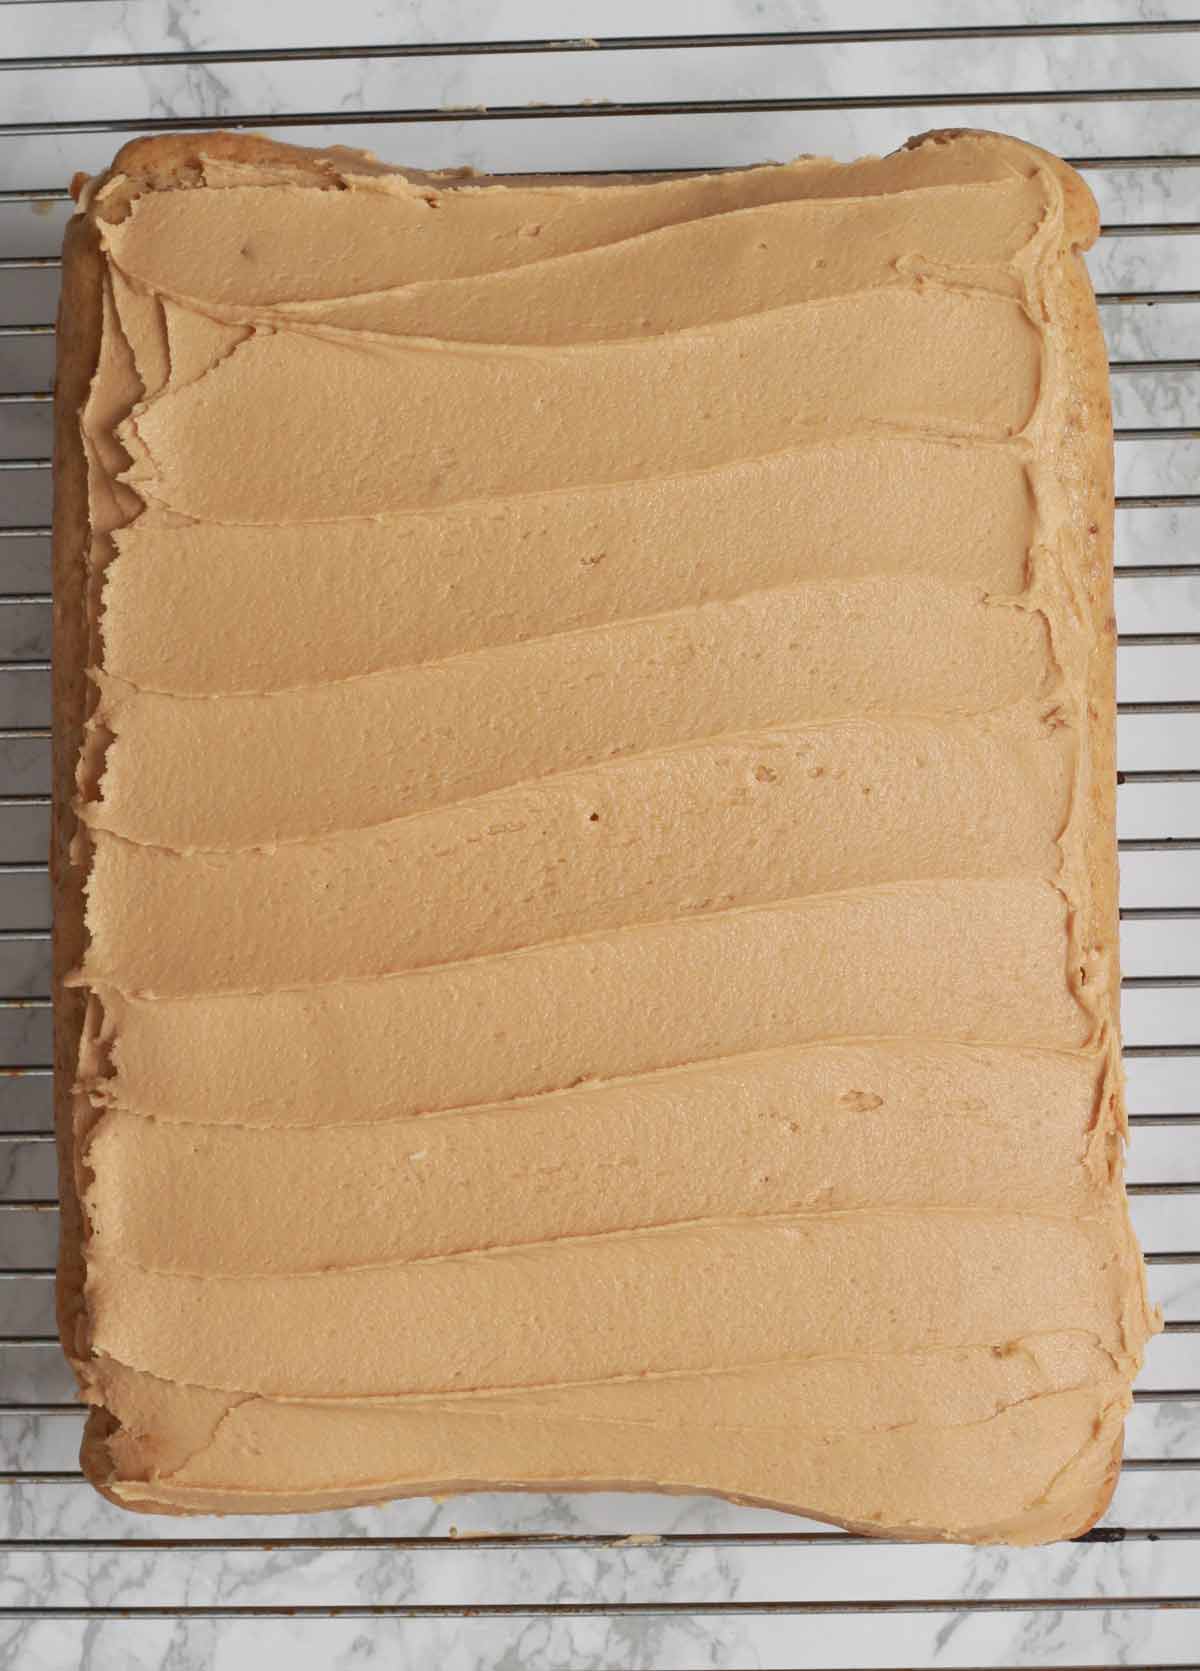 Vegan Biscoff Cake With Icing On Top